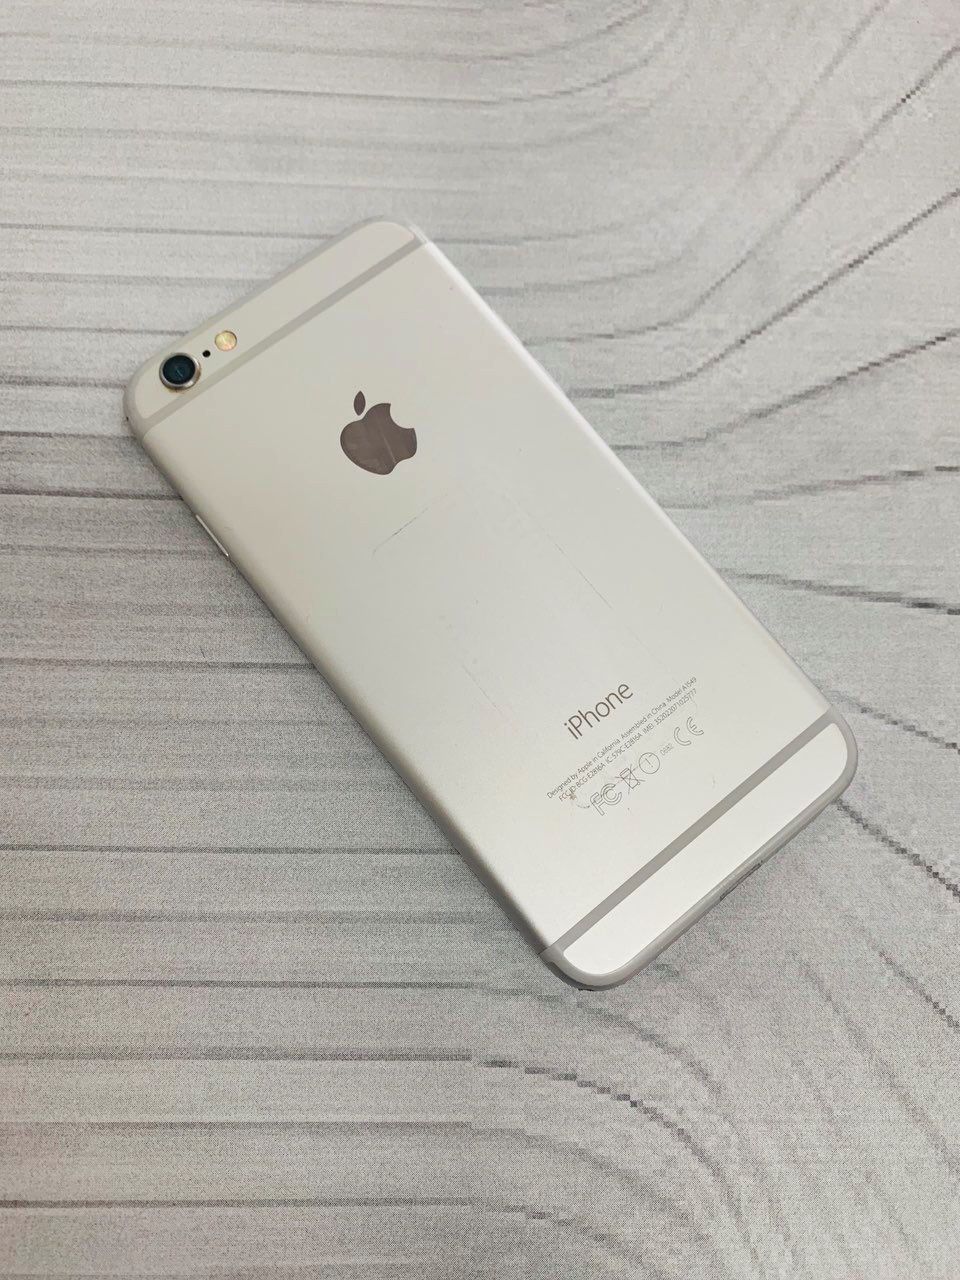 IPhone 6 (16 GB) Excellent Condition With Warranty